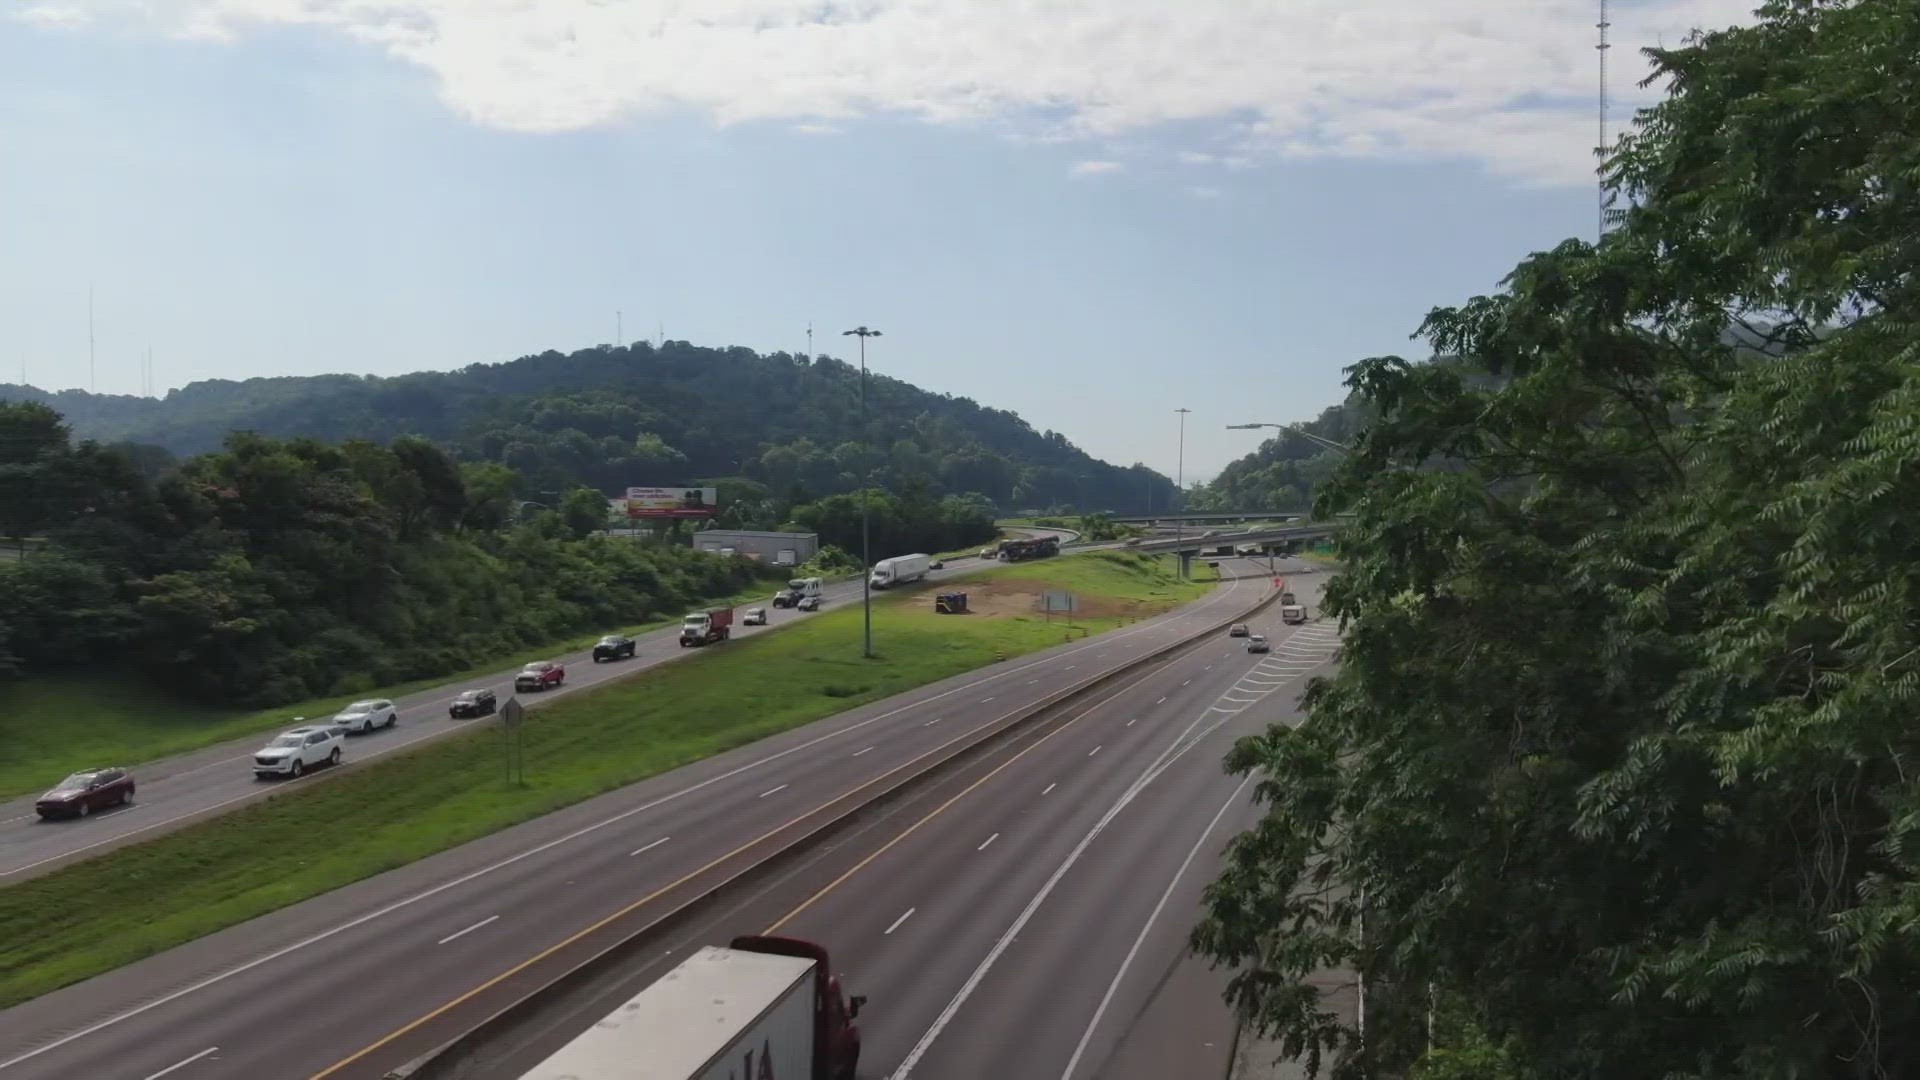 Authorities in Detroit, Knoxville and beyond are trying to stop fentanyl from flowing along I-75 and into cities.